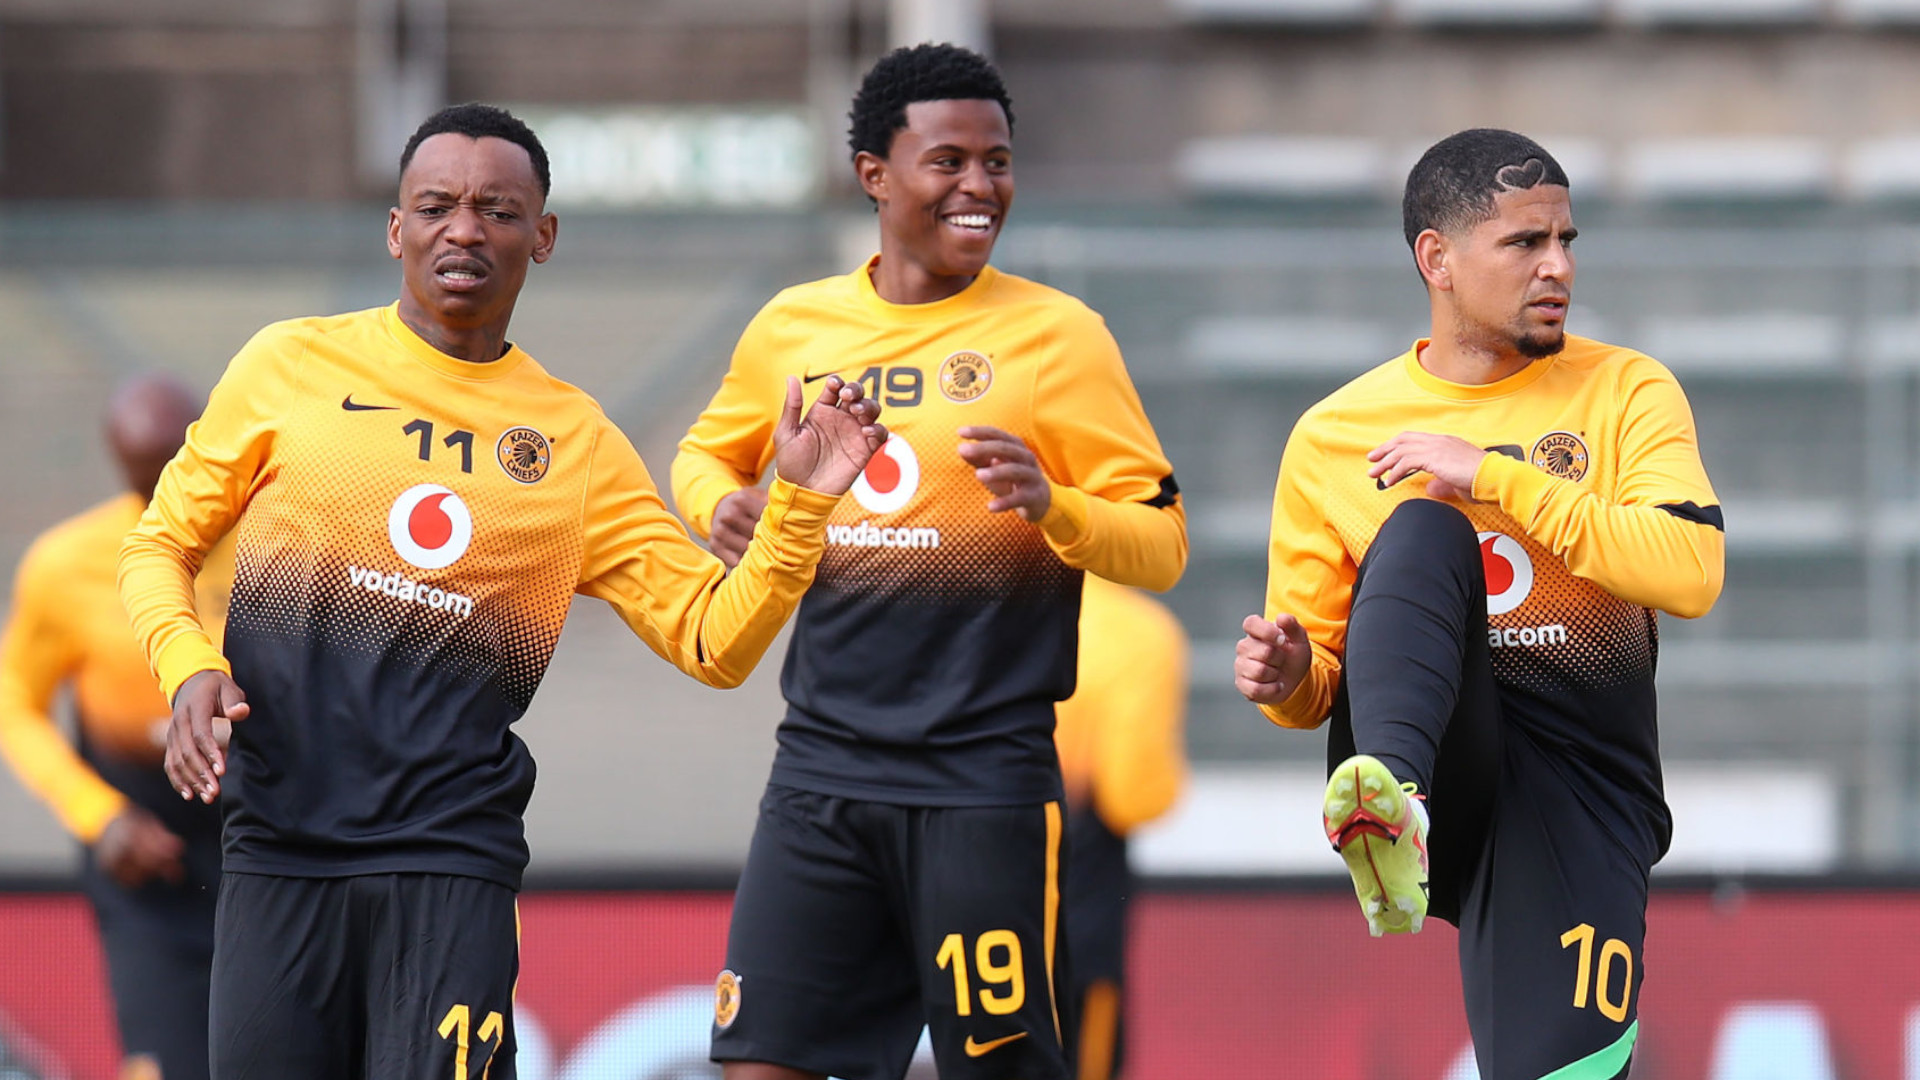 Revealed: Kaizer Chiefs XI to face Royal AM – Petersen, Ngcobo starts, Dube benched